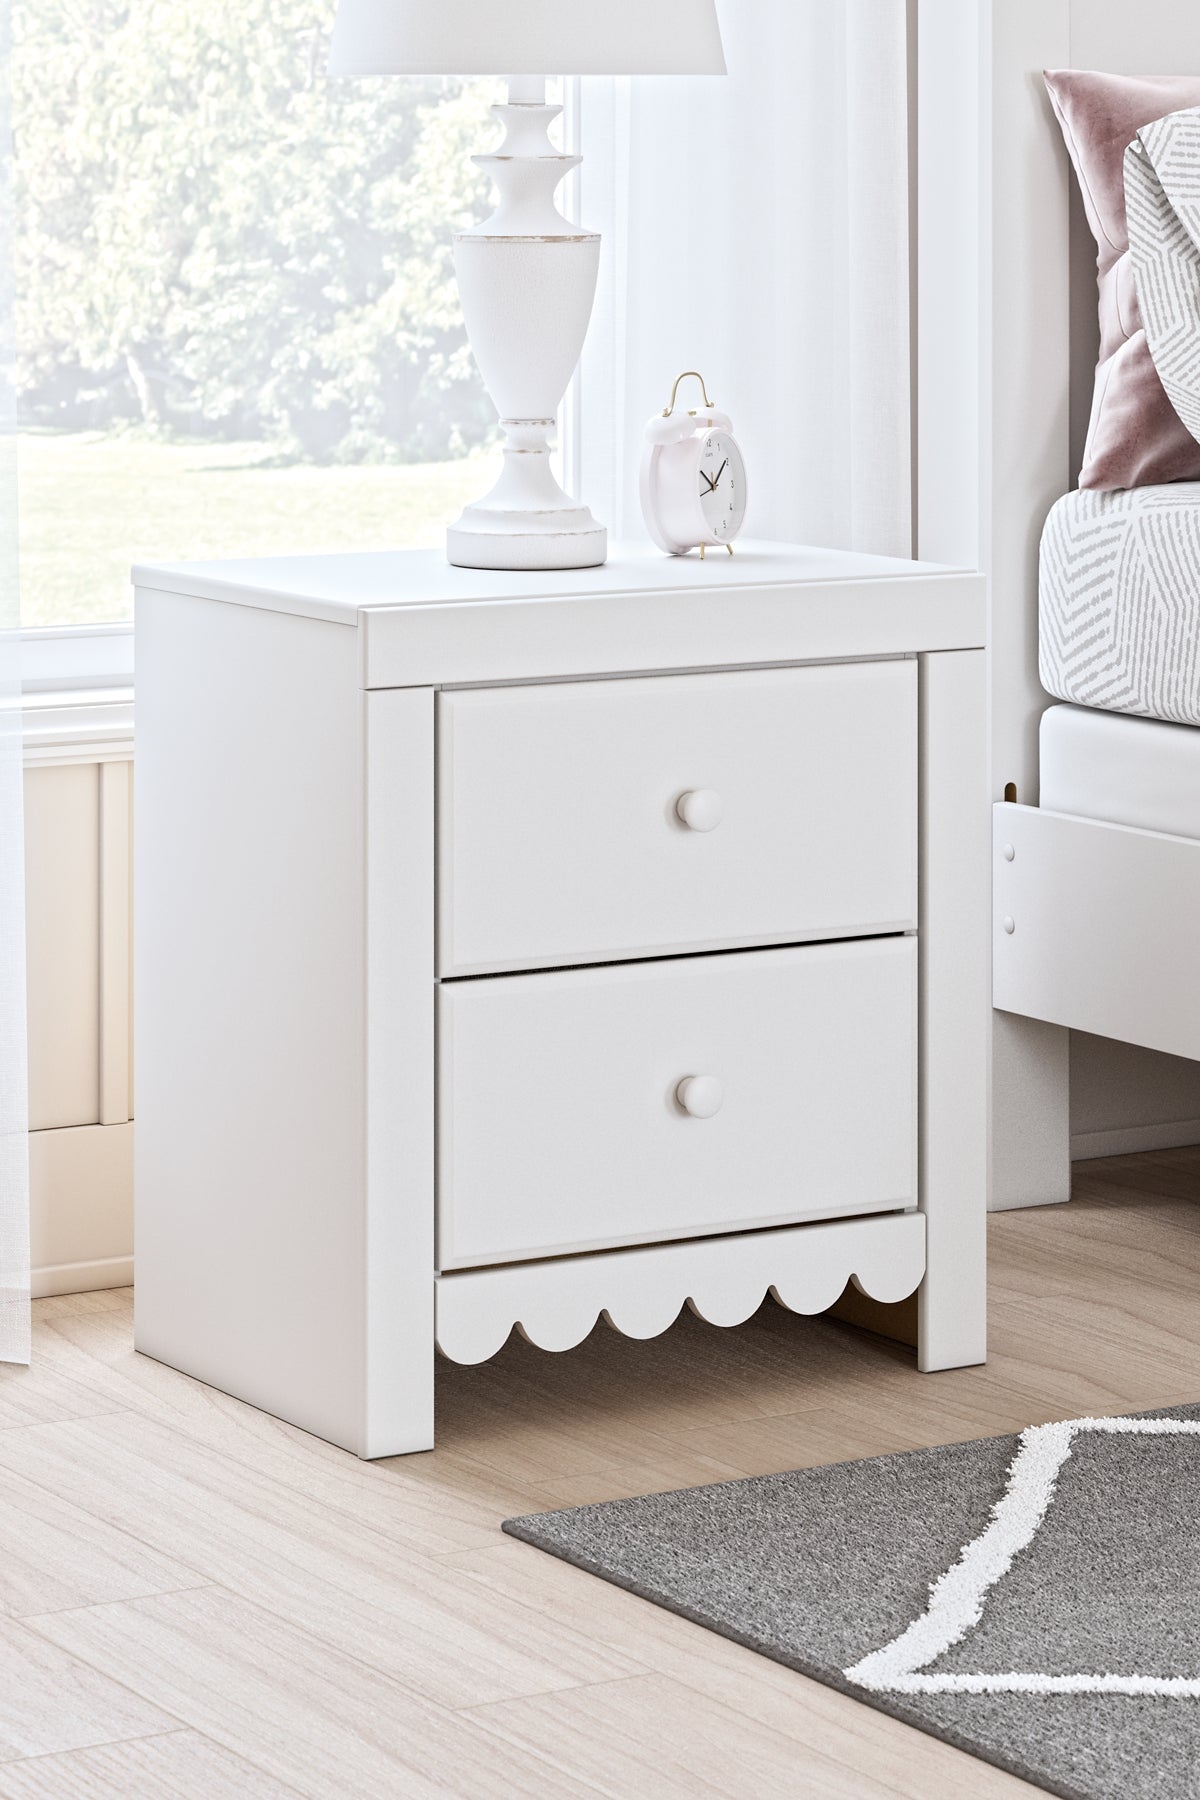 Mollviney Twin Panel Bed with Dresser and Nightstand